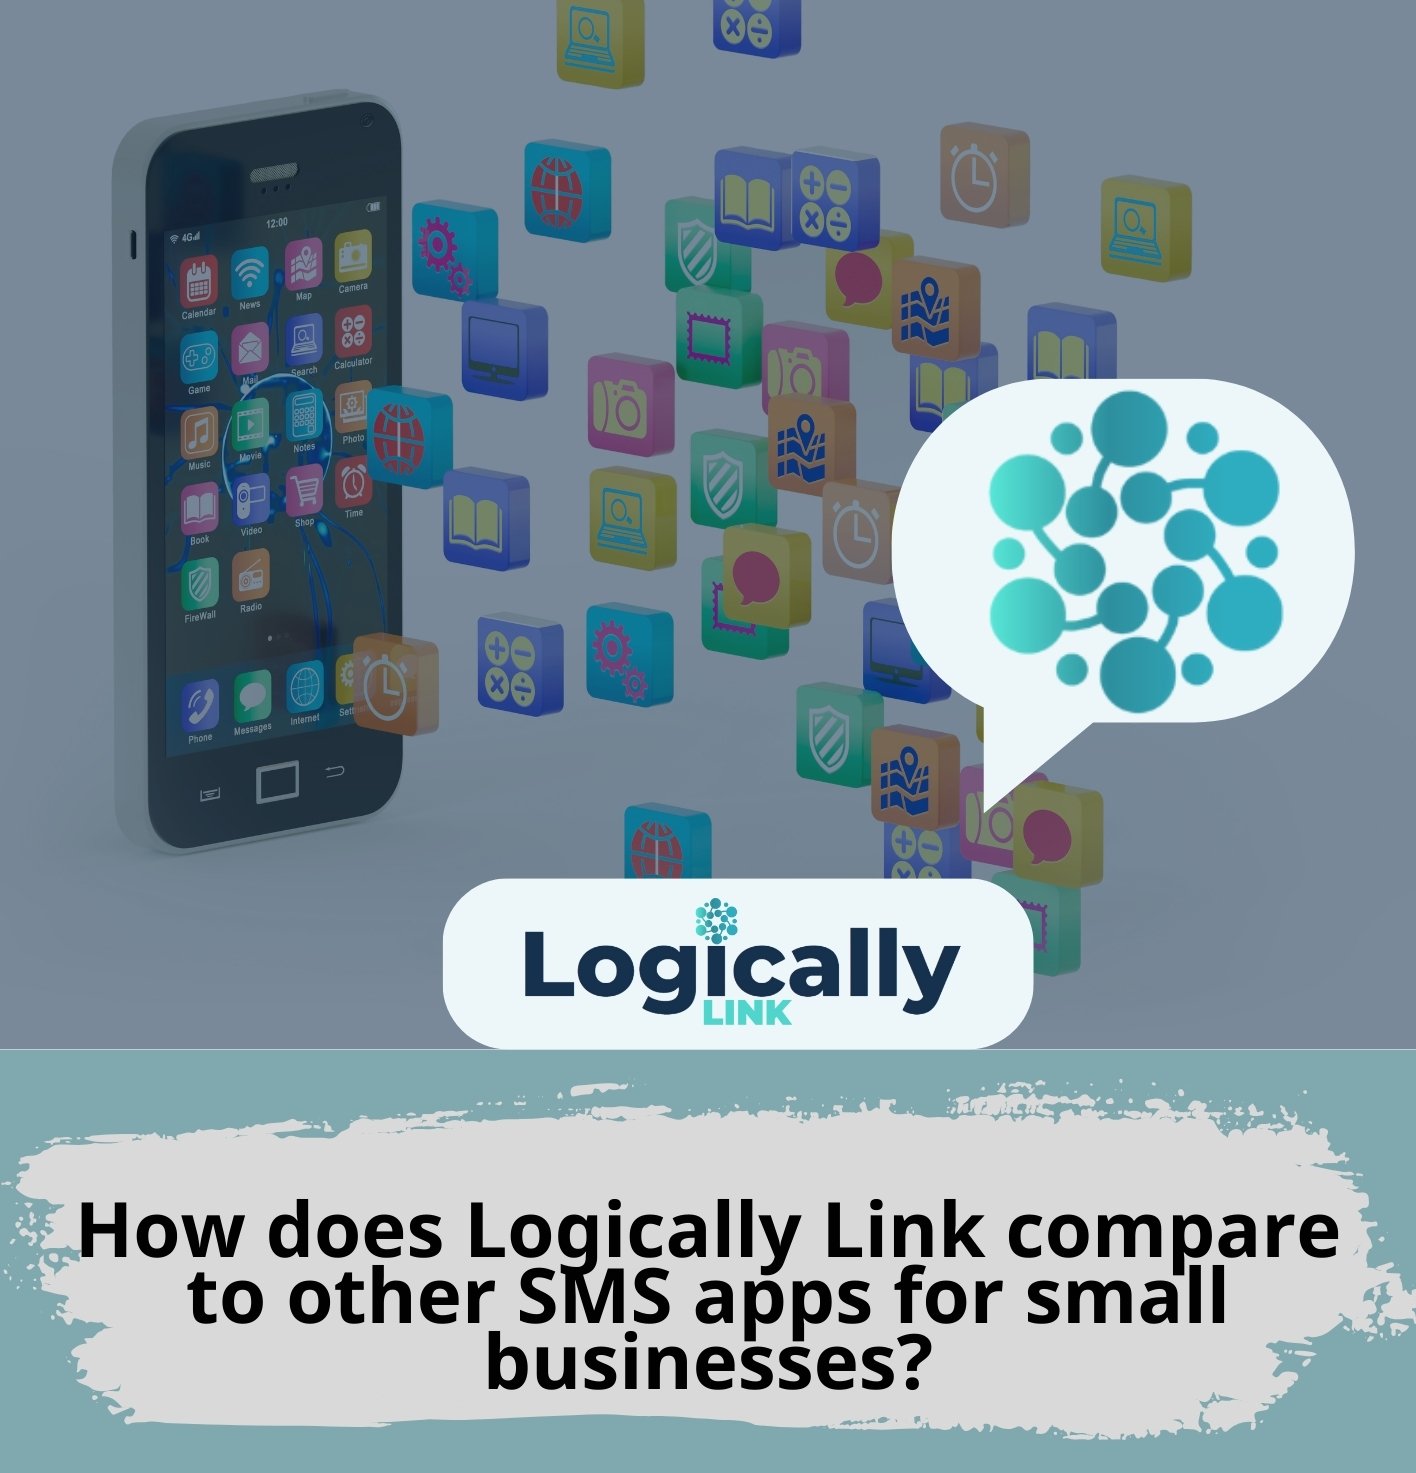 How does Logically Link compare to other SMS apps for small businesses?